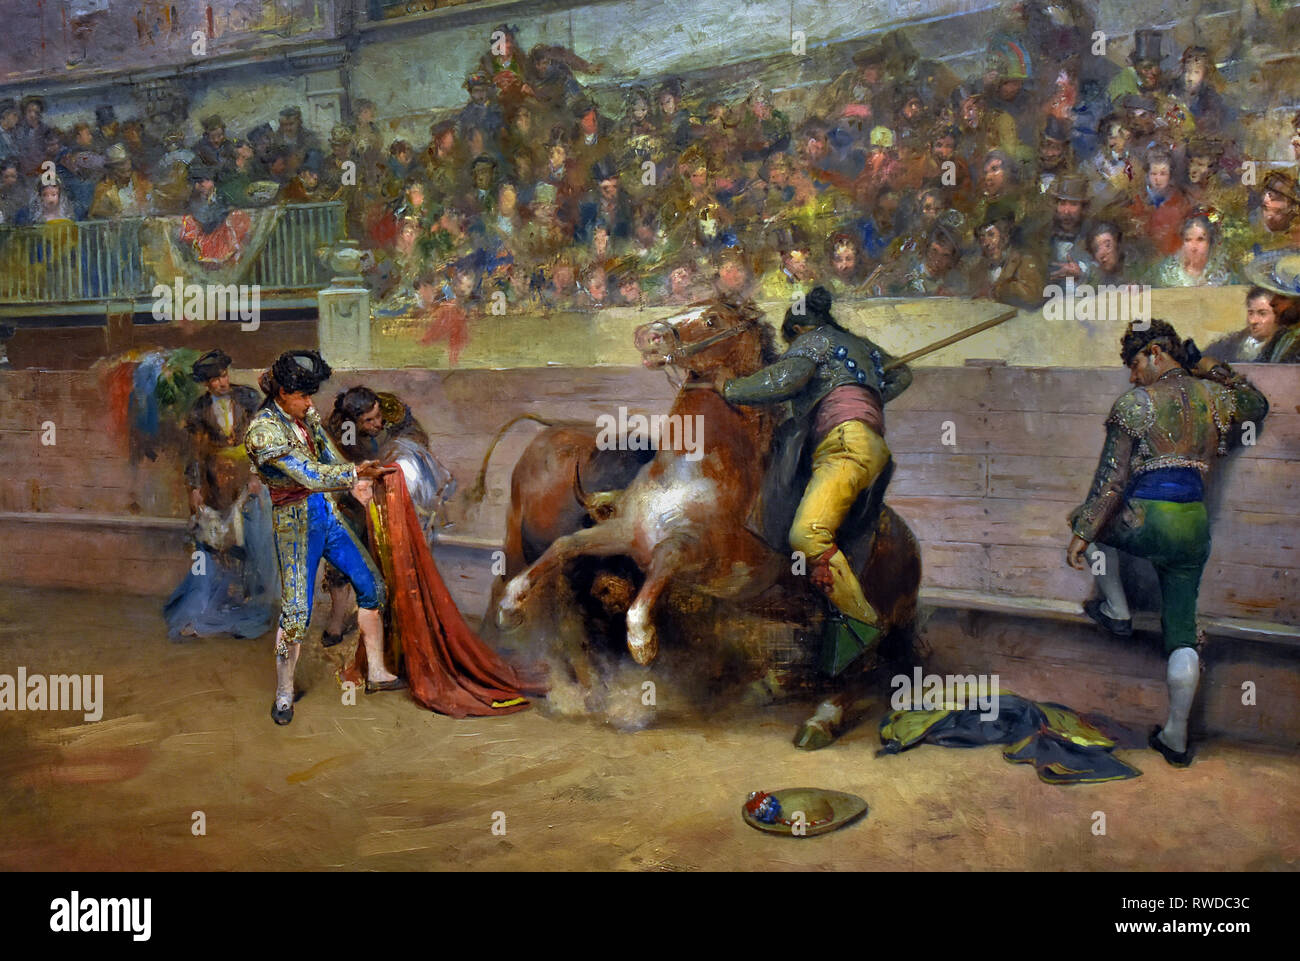 Distracting the Bull with Swords 1885-1890 by Jose Denis Belgrano 1844-1917 Spain, Spanish. Stock Photo